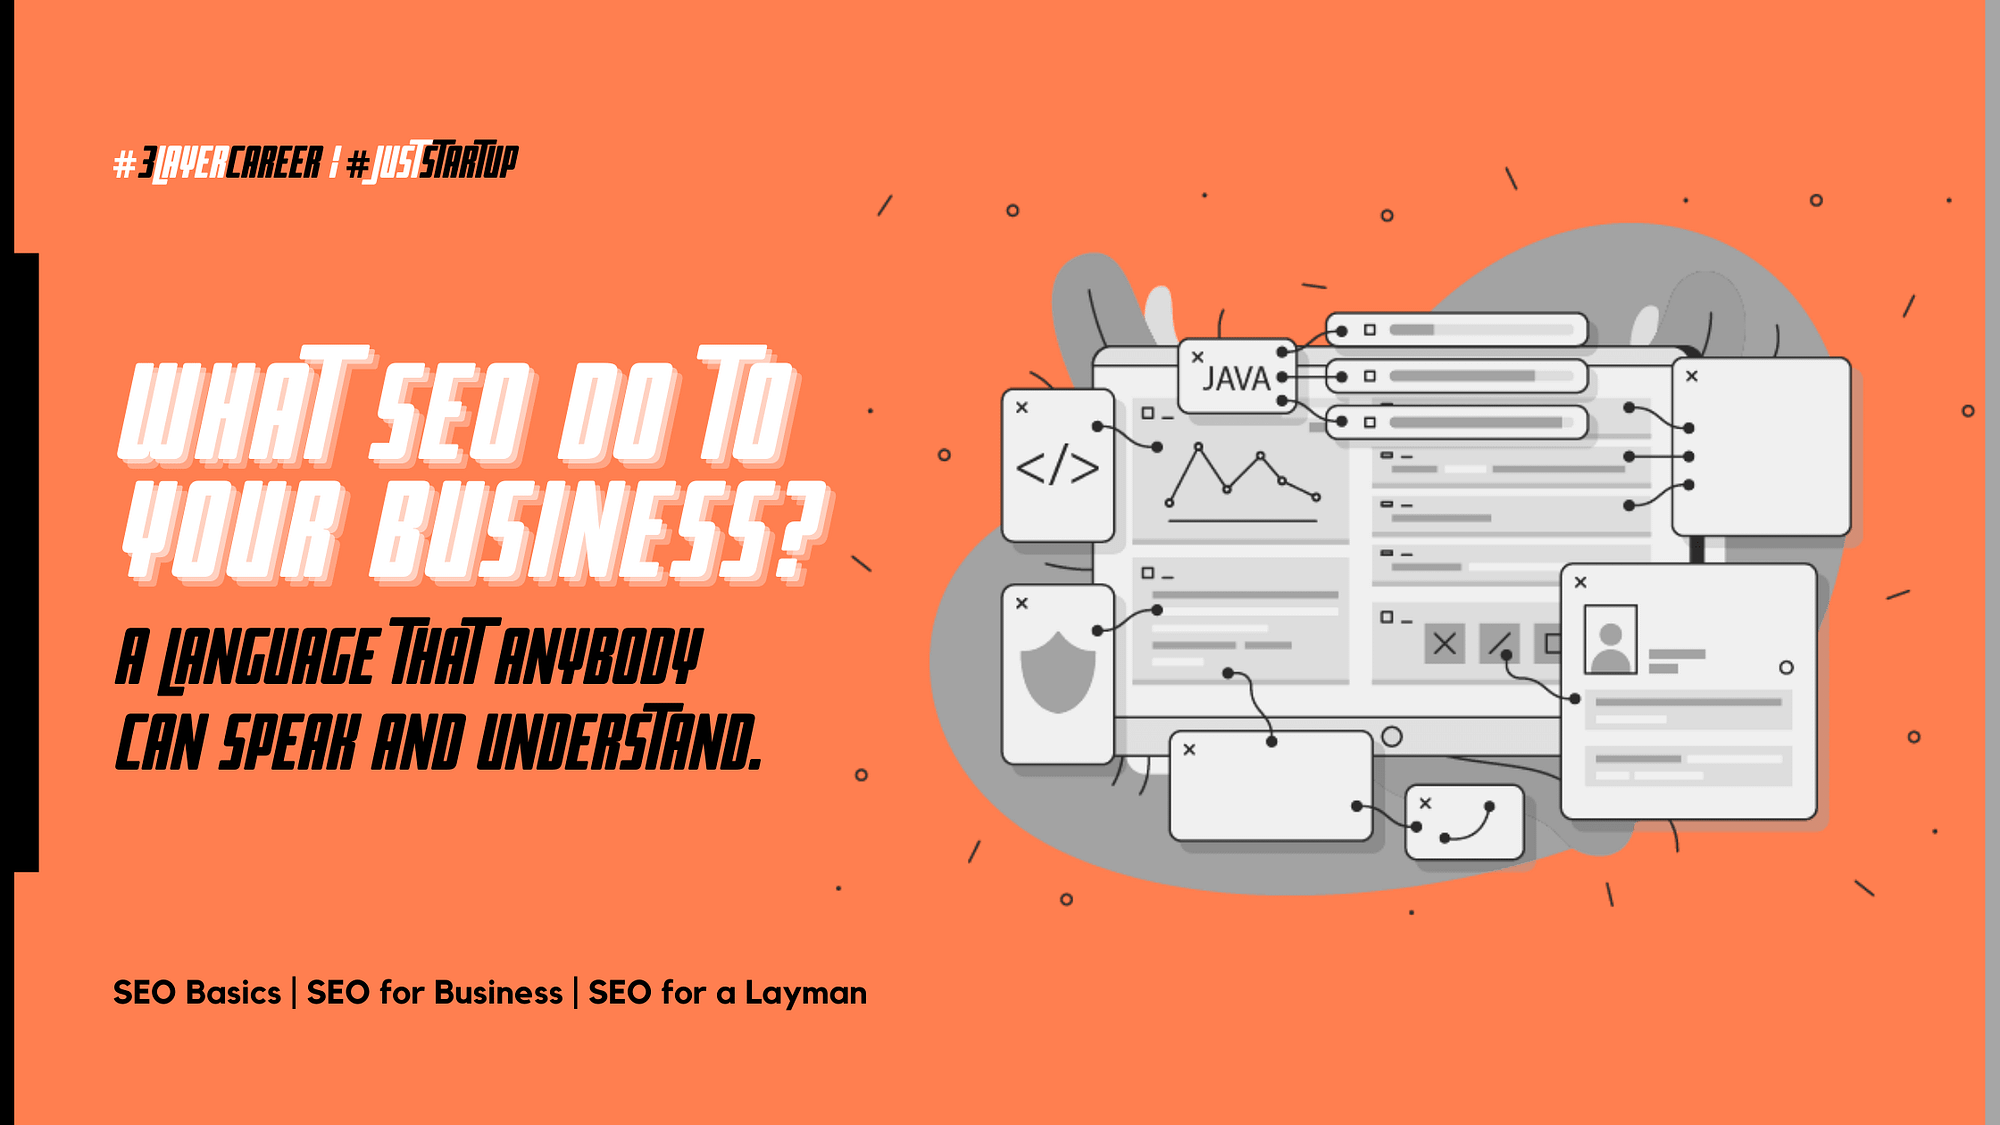 What SEO do to your business? SEO explained for a layman.